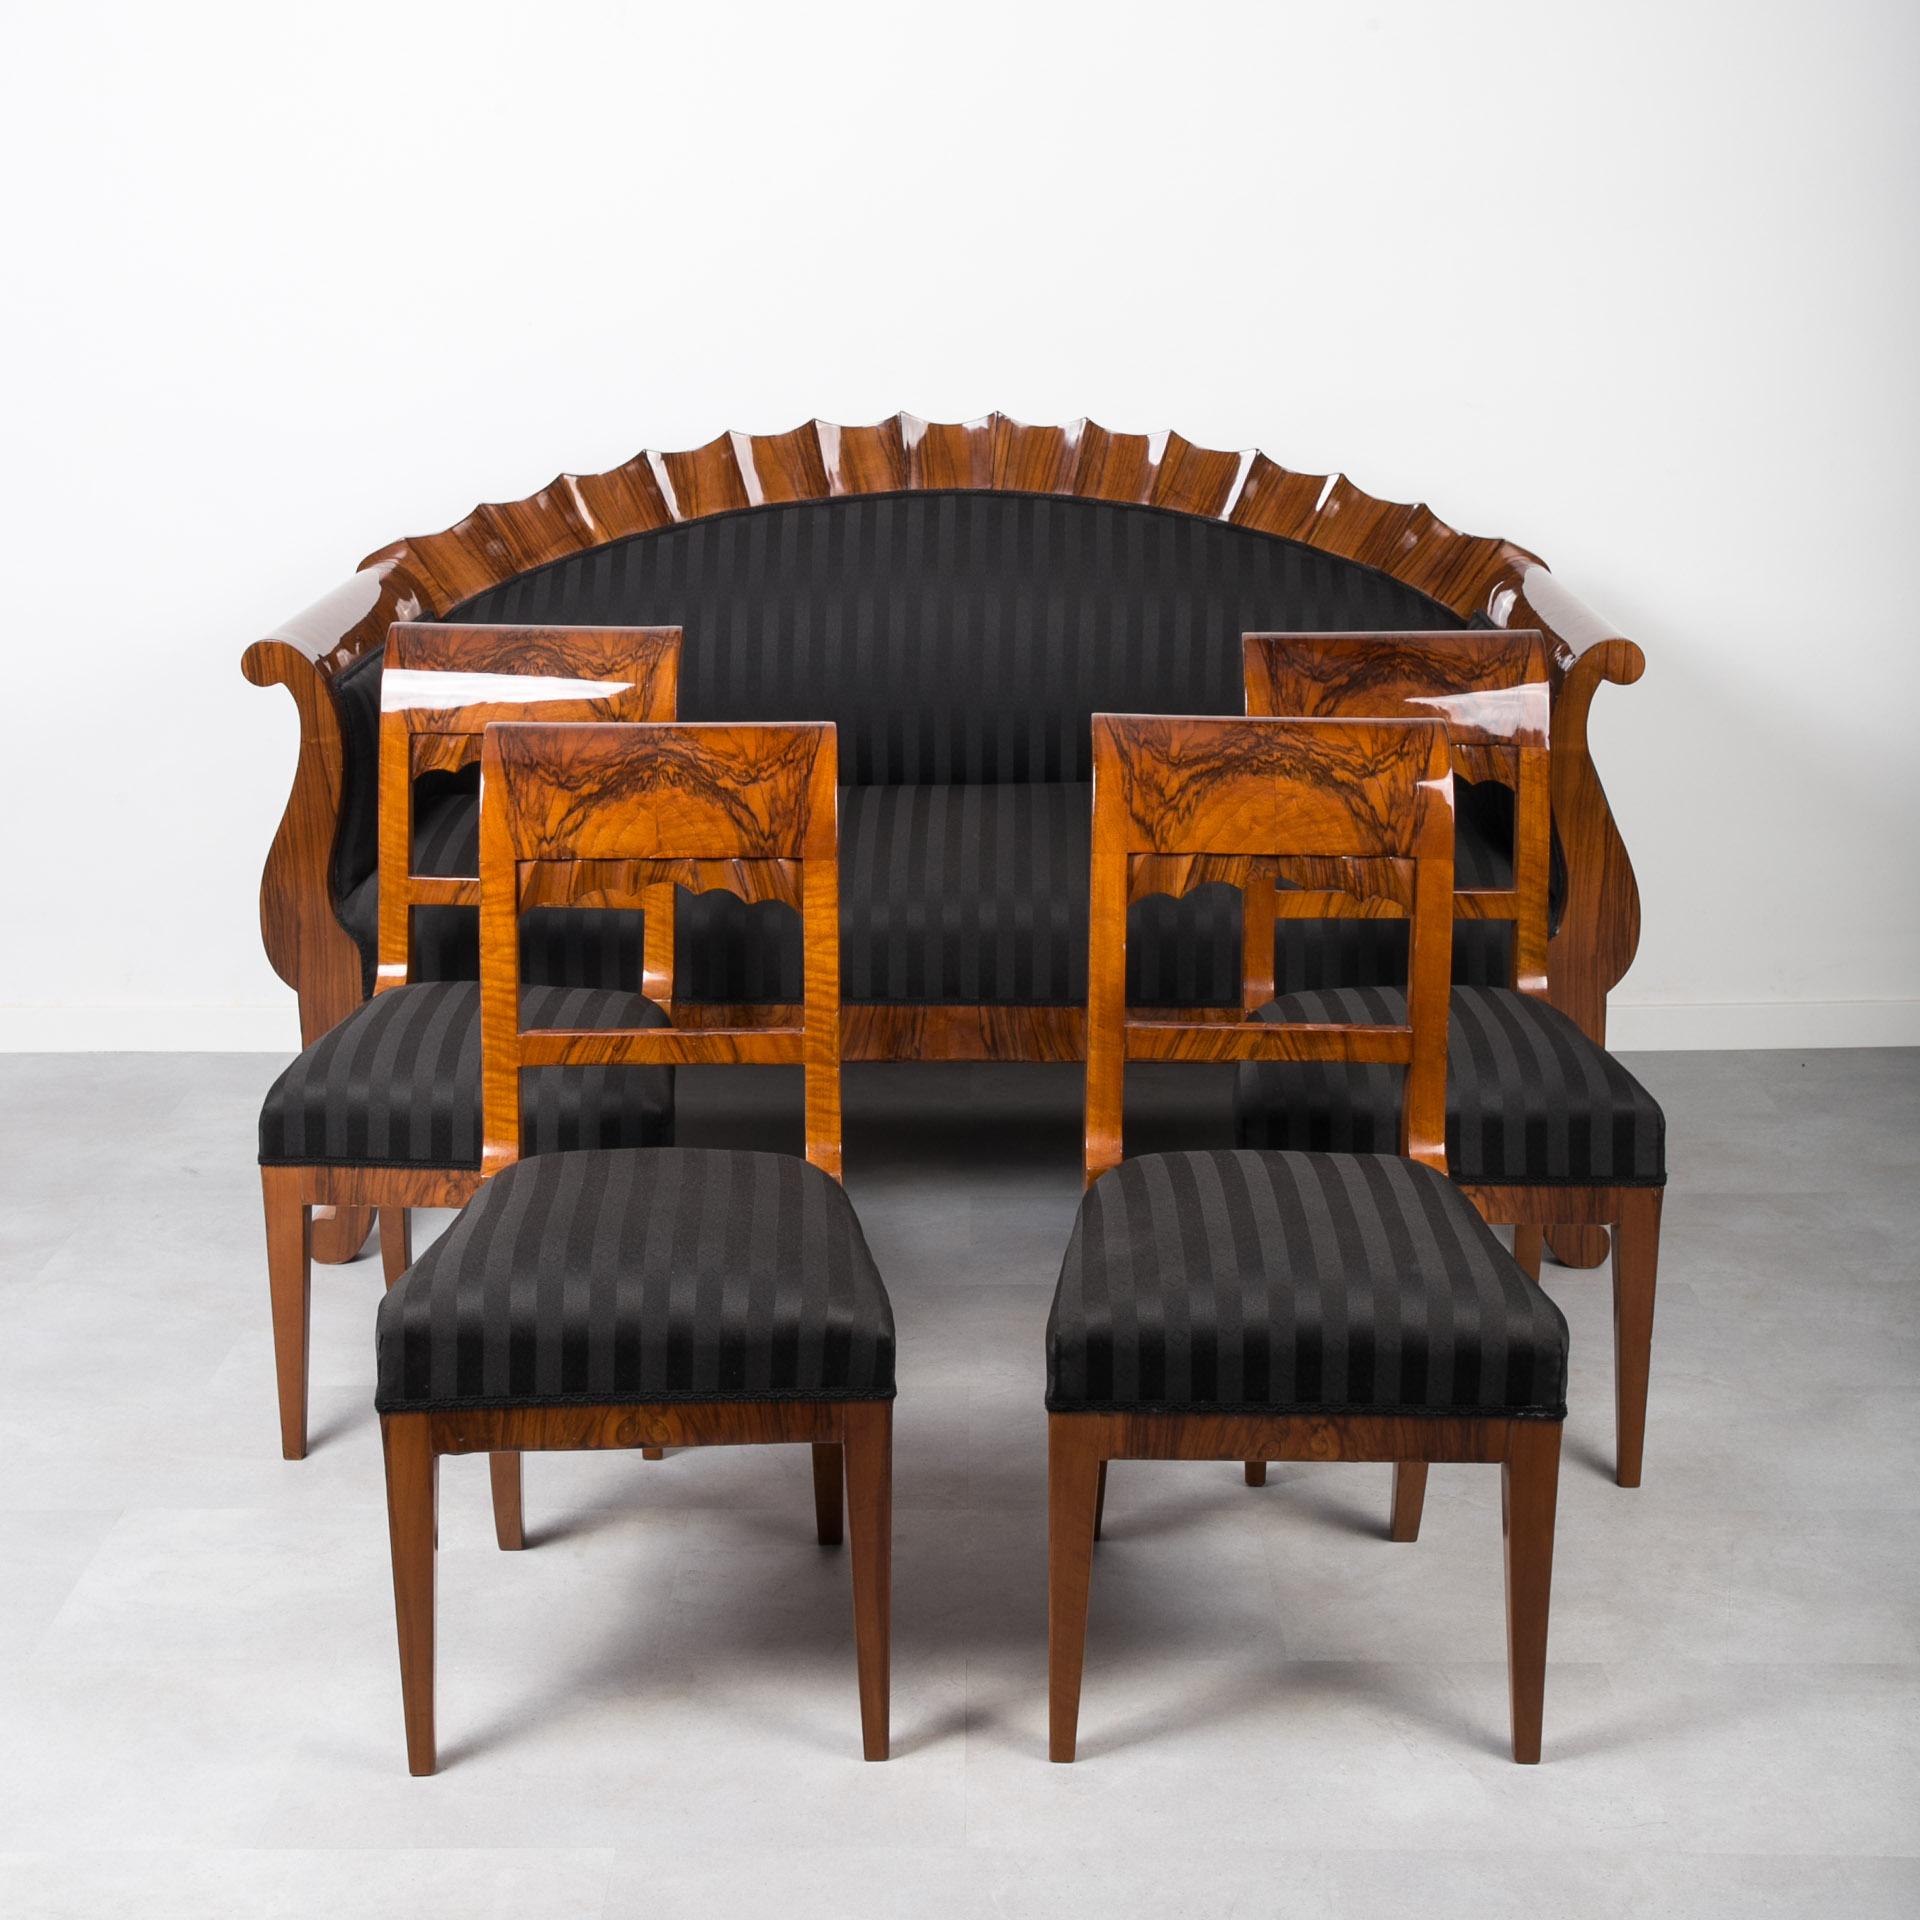 Polished Biedermeier Sofa and 4 Dining Chairs,  Germany, 19th Century